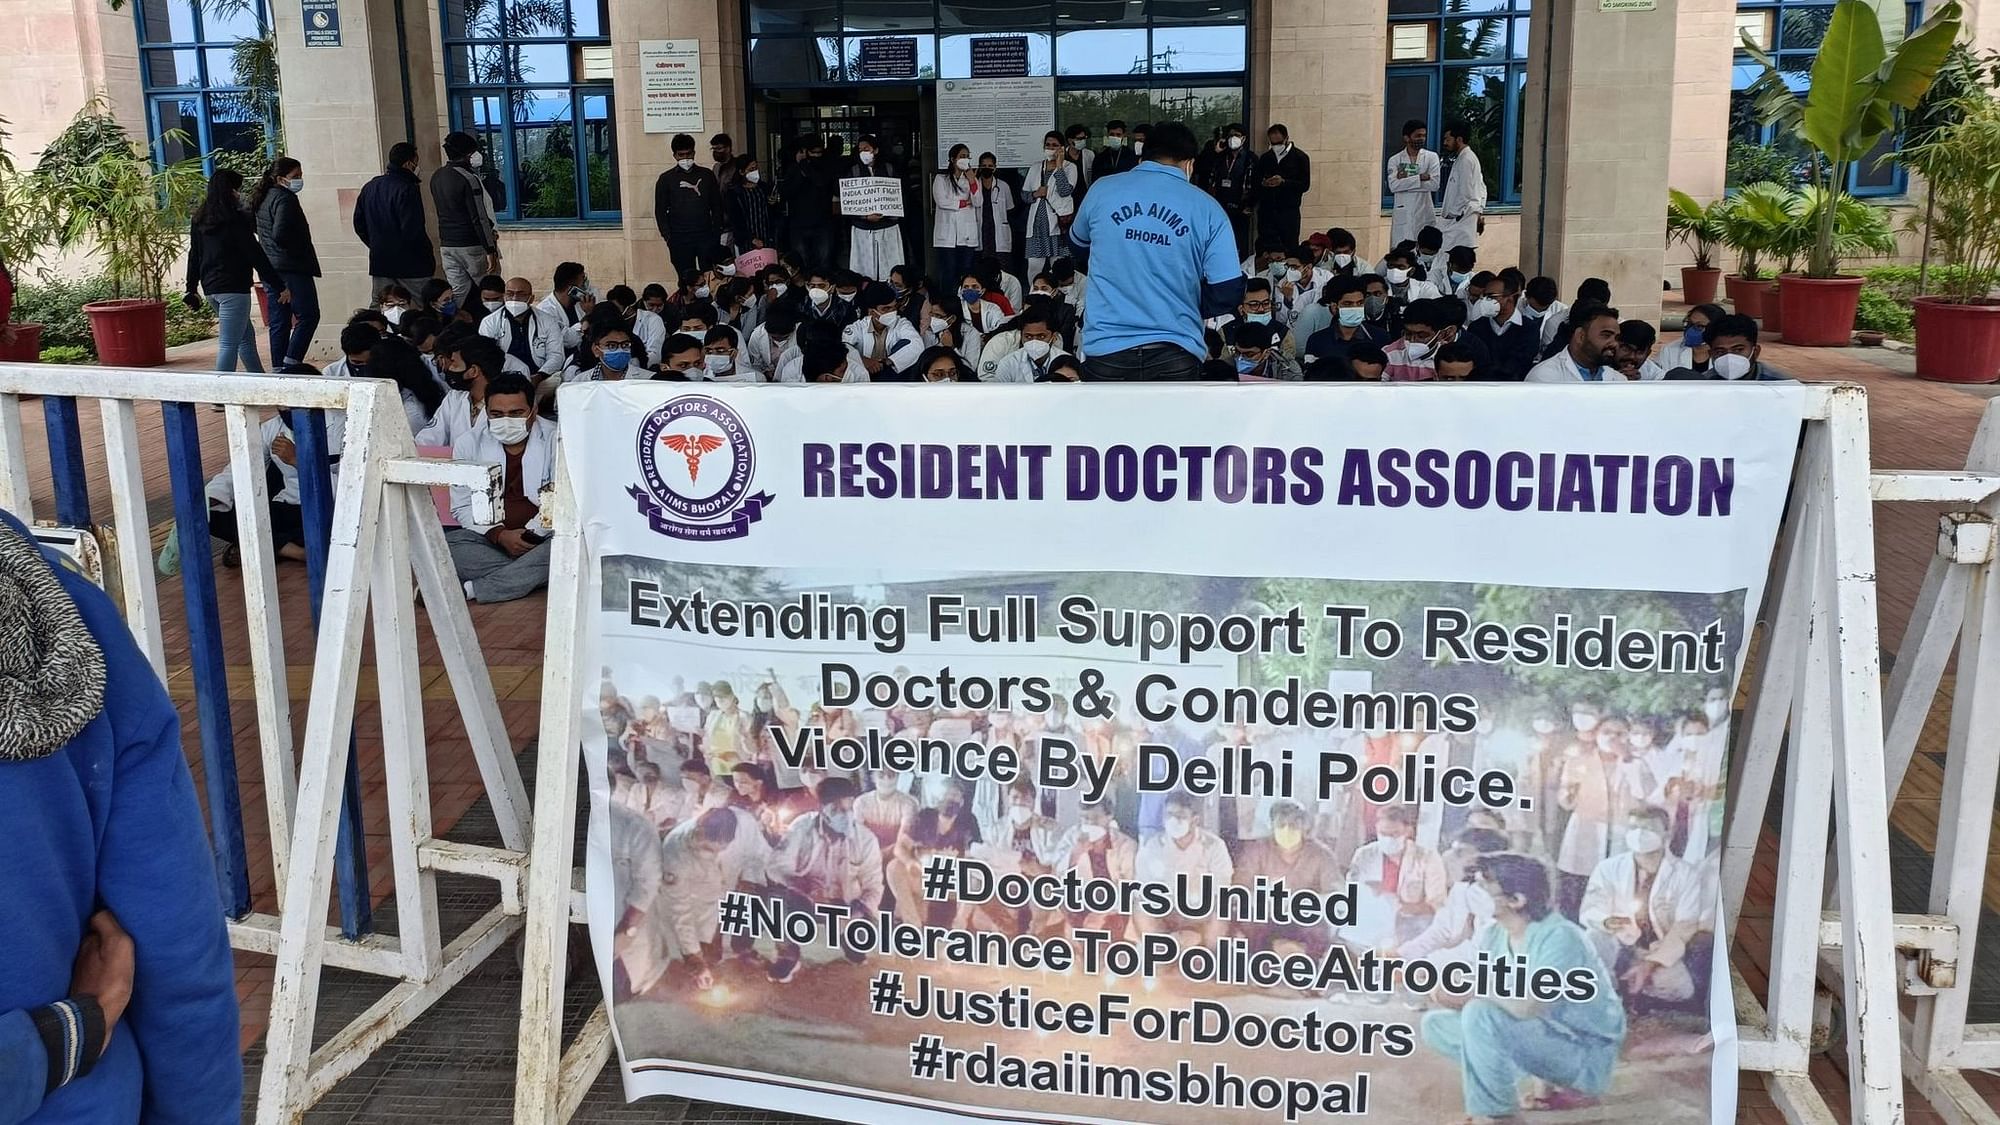 <div class="paragraphs"><p>The RDA in Madhya Pradesh's Bhopal also joined the agitation and announced suspension of hospital services, excluding emergency services, from 9 am to 1pm.</p></div>